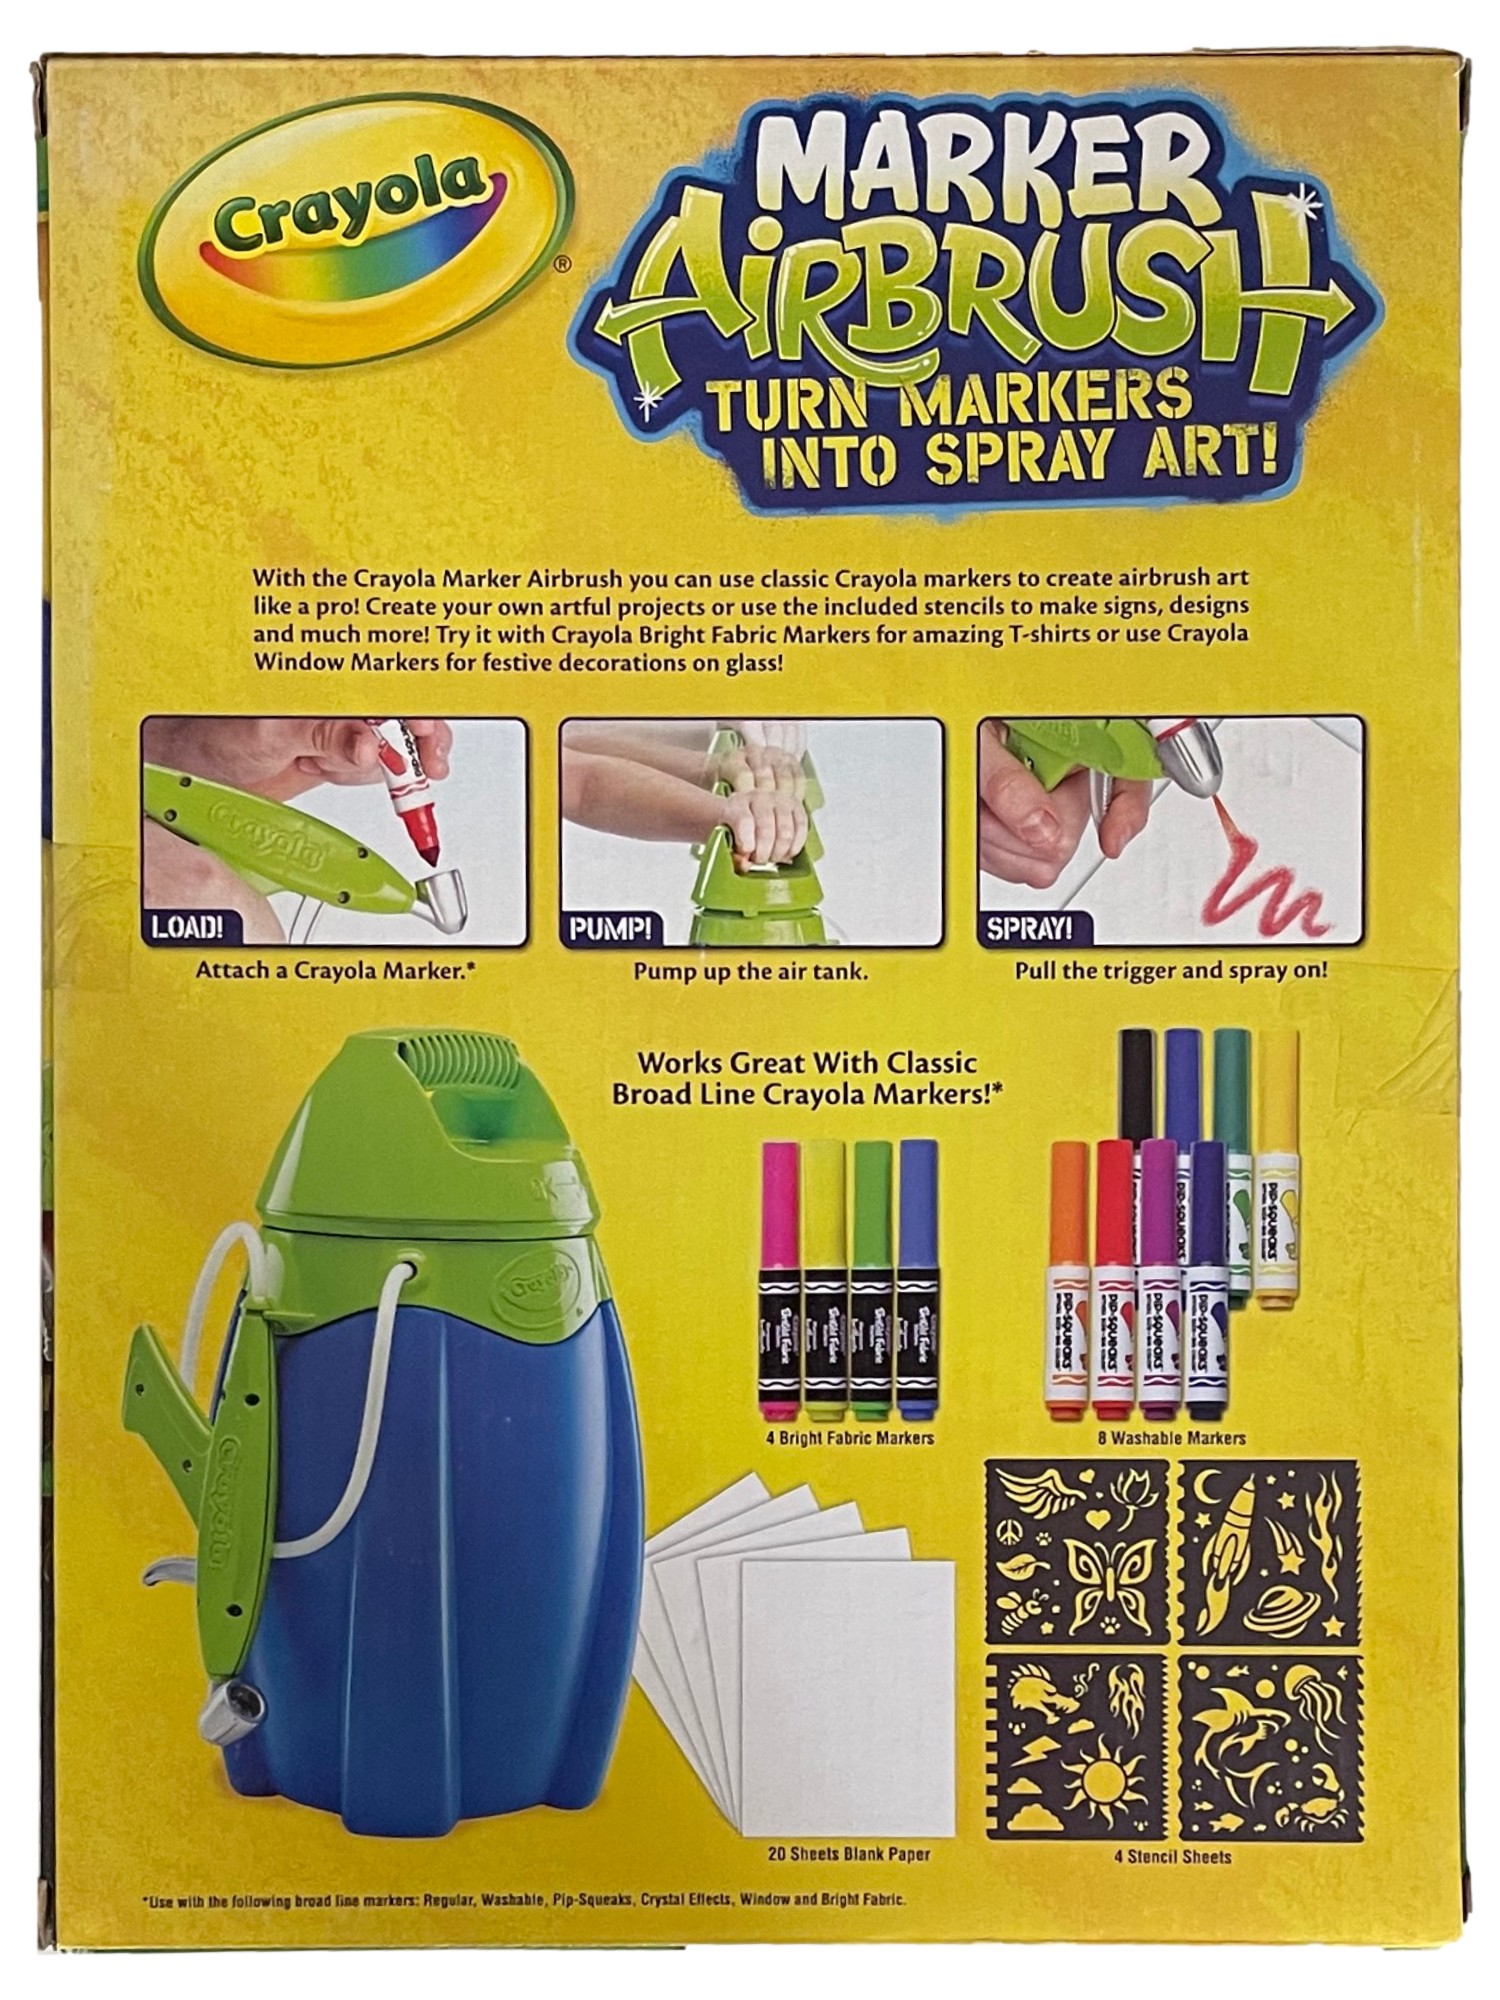 Crayola Marker Air Brush Sprayer with Washable Markers and Paper